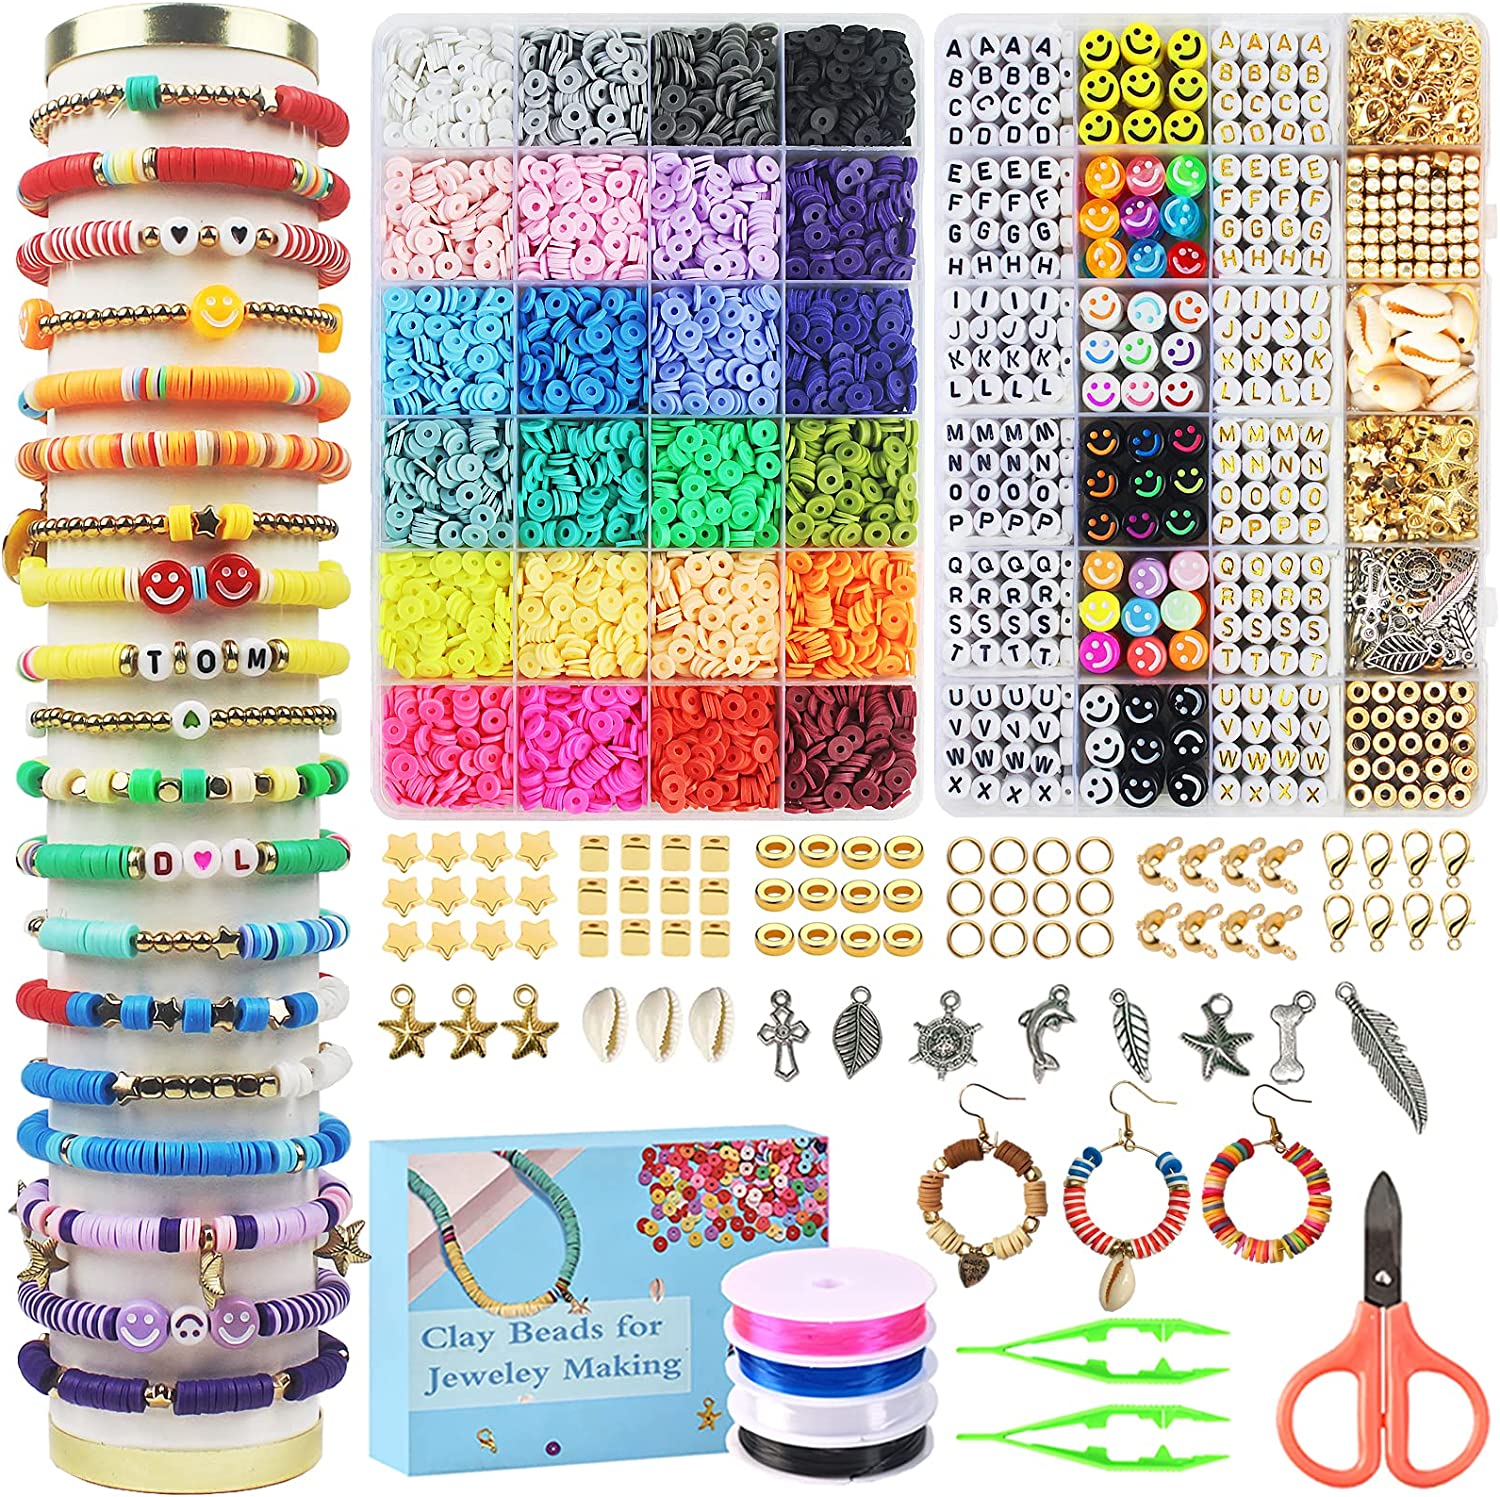 Quefe 3960pcs Pony Beads for Bracelet Making Kit 48 Colors Kandi Beads Set,  2400pcs Plastic Rainbow Bead Bulk and 1560pcs Letter Beads with 20 Meter  Elastic Threads for Craft Jewelry Necklace